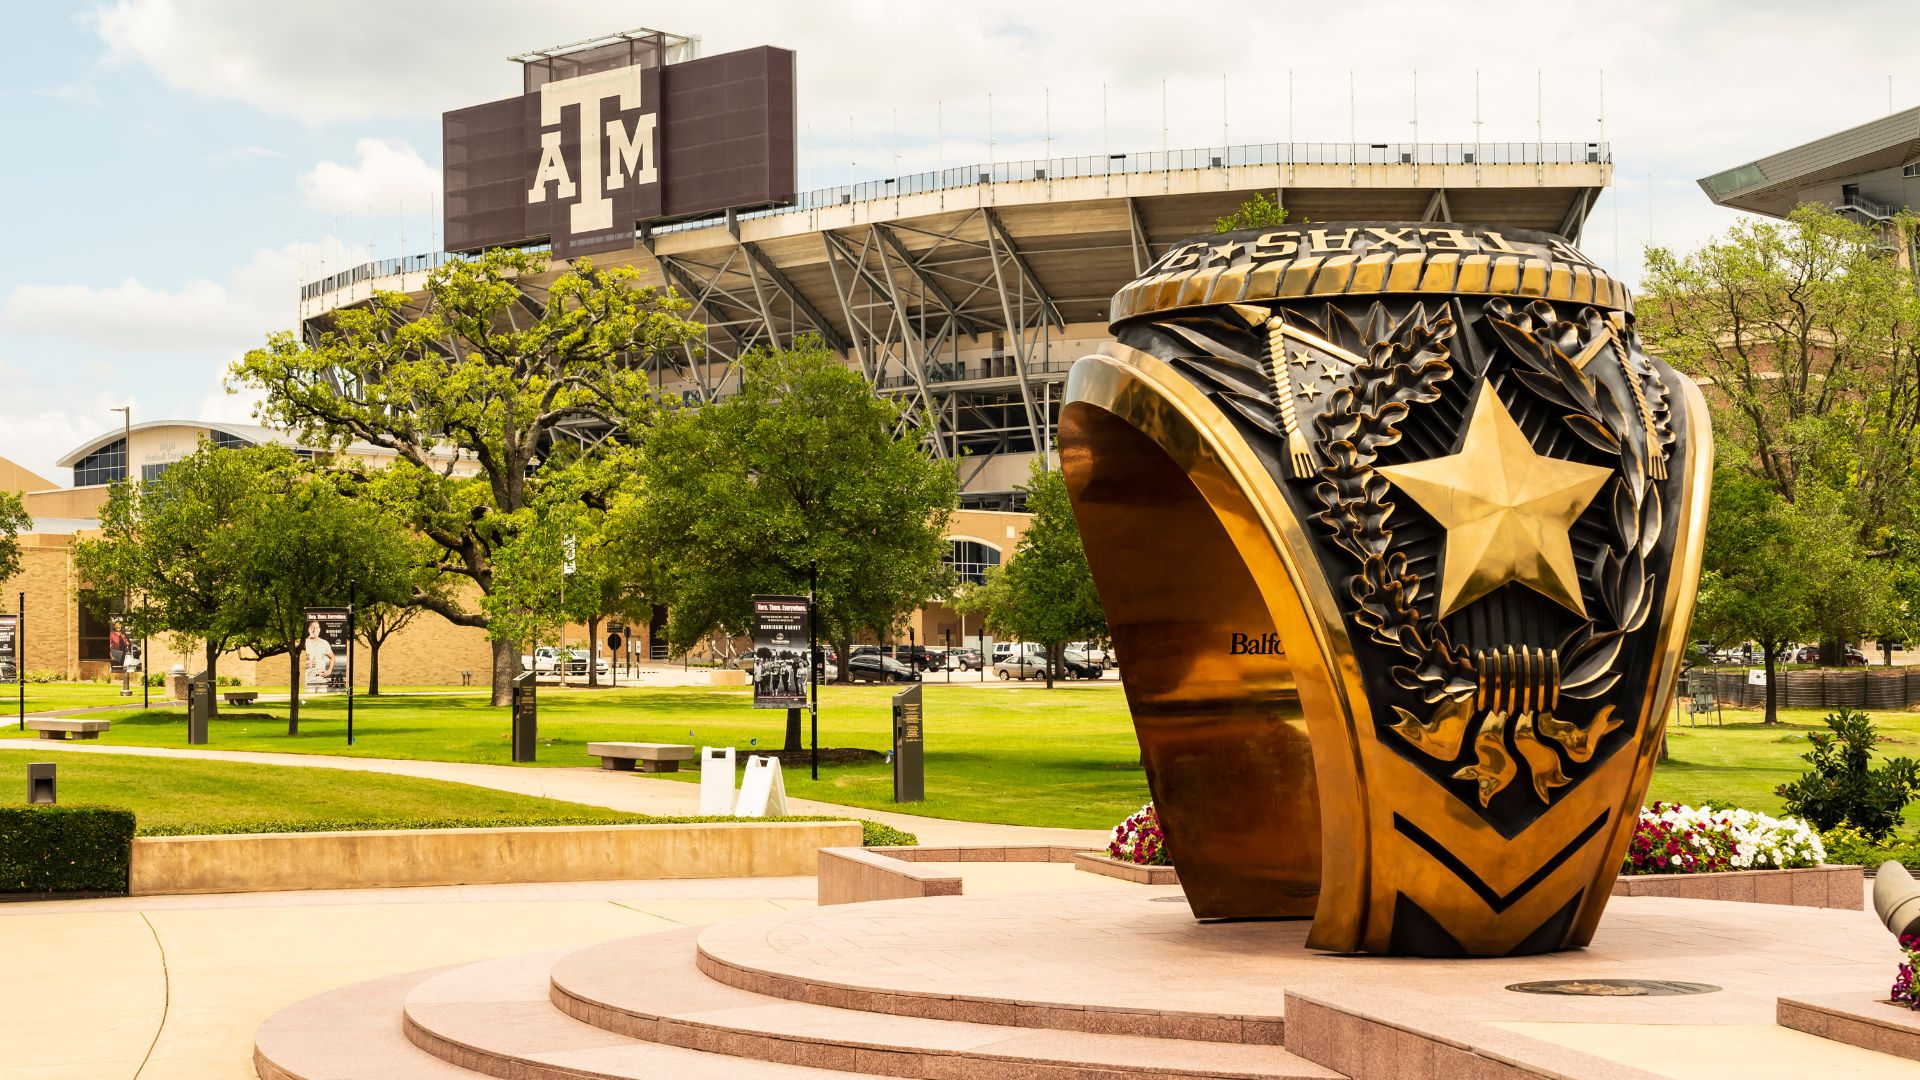 Texas A&M University football stadium with giant ring in foreground 